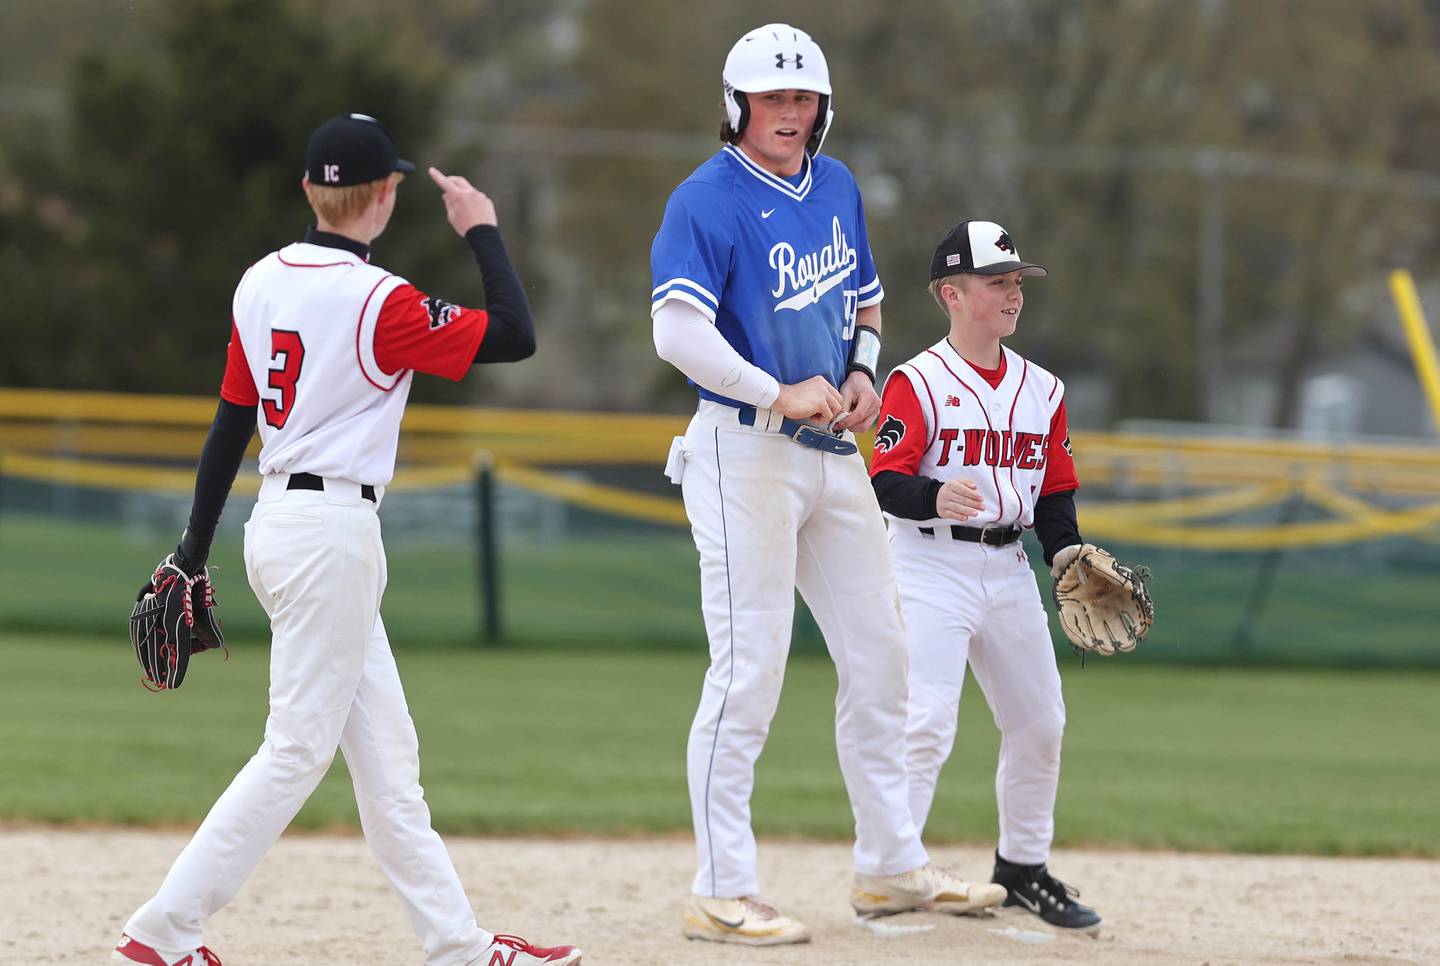 Indian Creek's Noah Fenske (right) and Hinckley-Big Rock's Martin Ledbetter at second base during their game Monday, May 1, 2023, at Indian Creek High School in Shabbona.